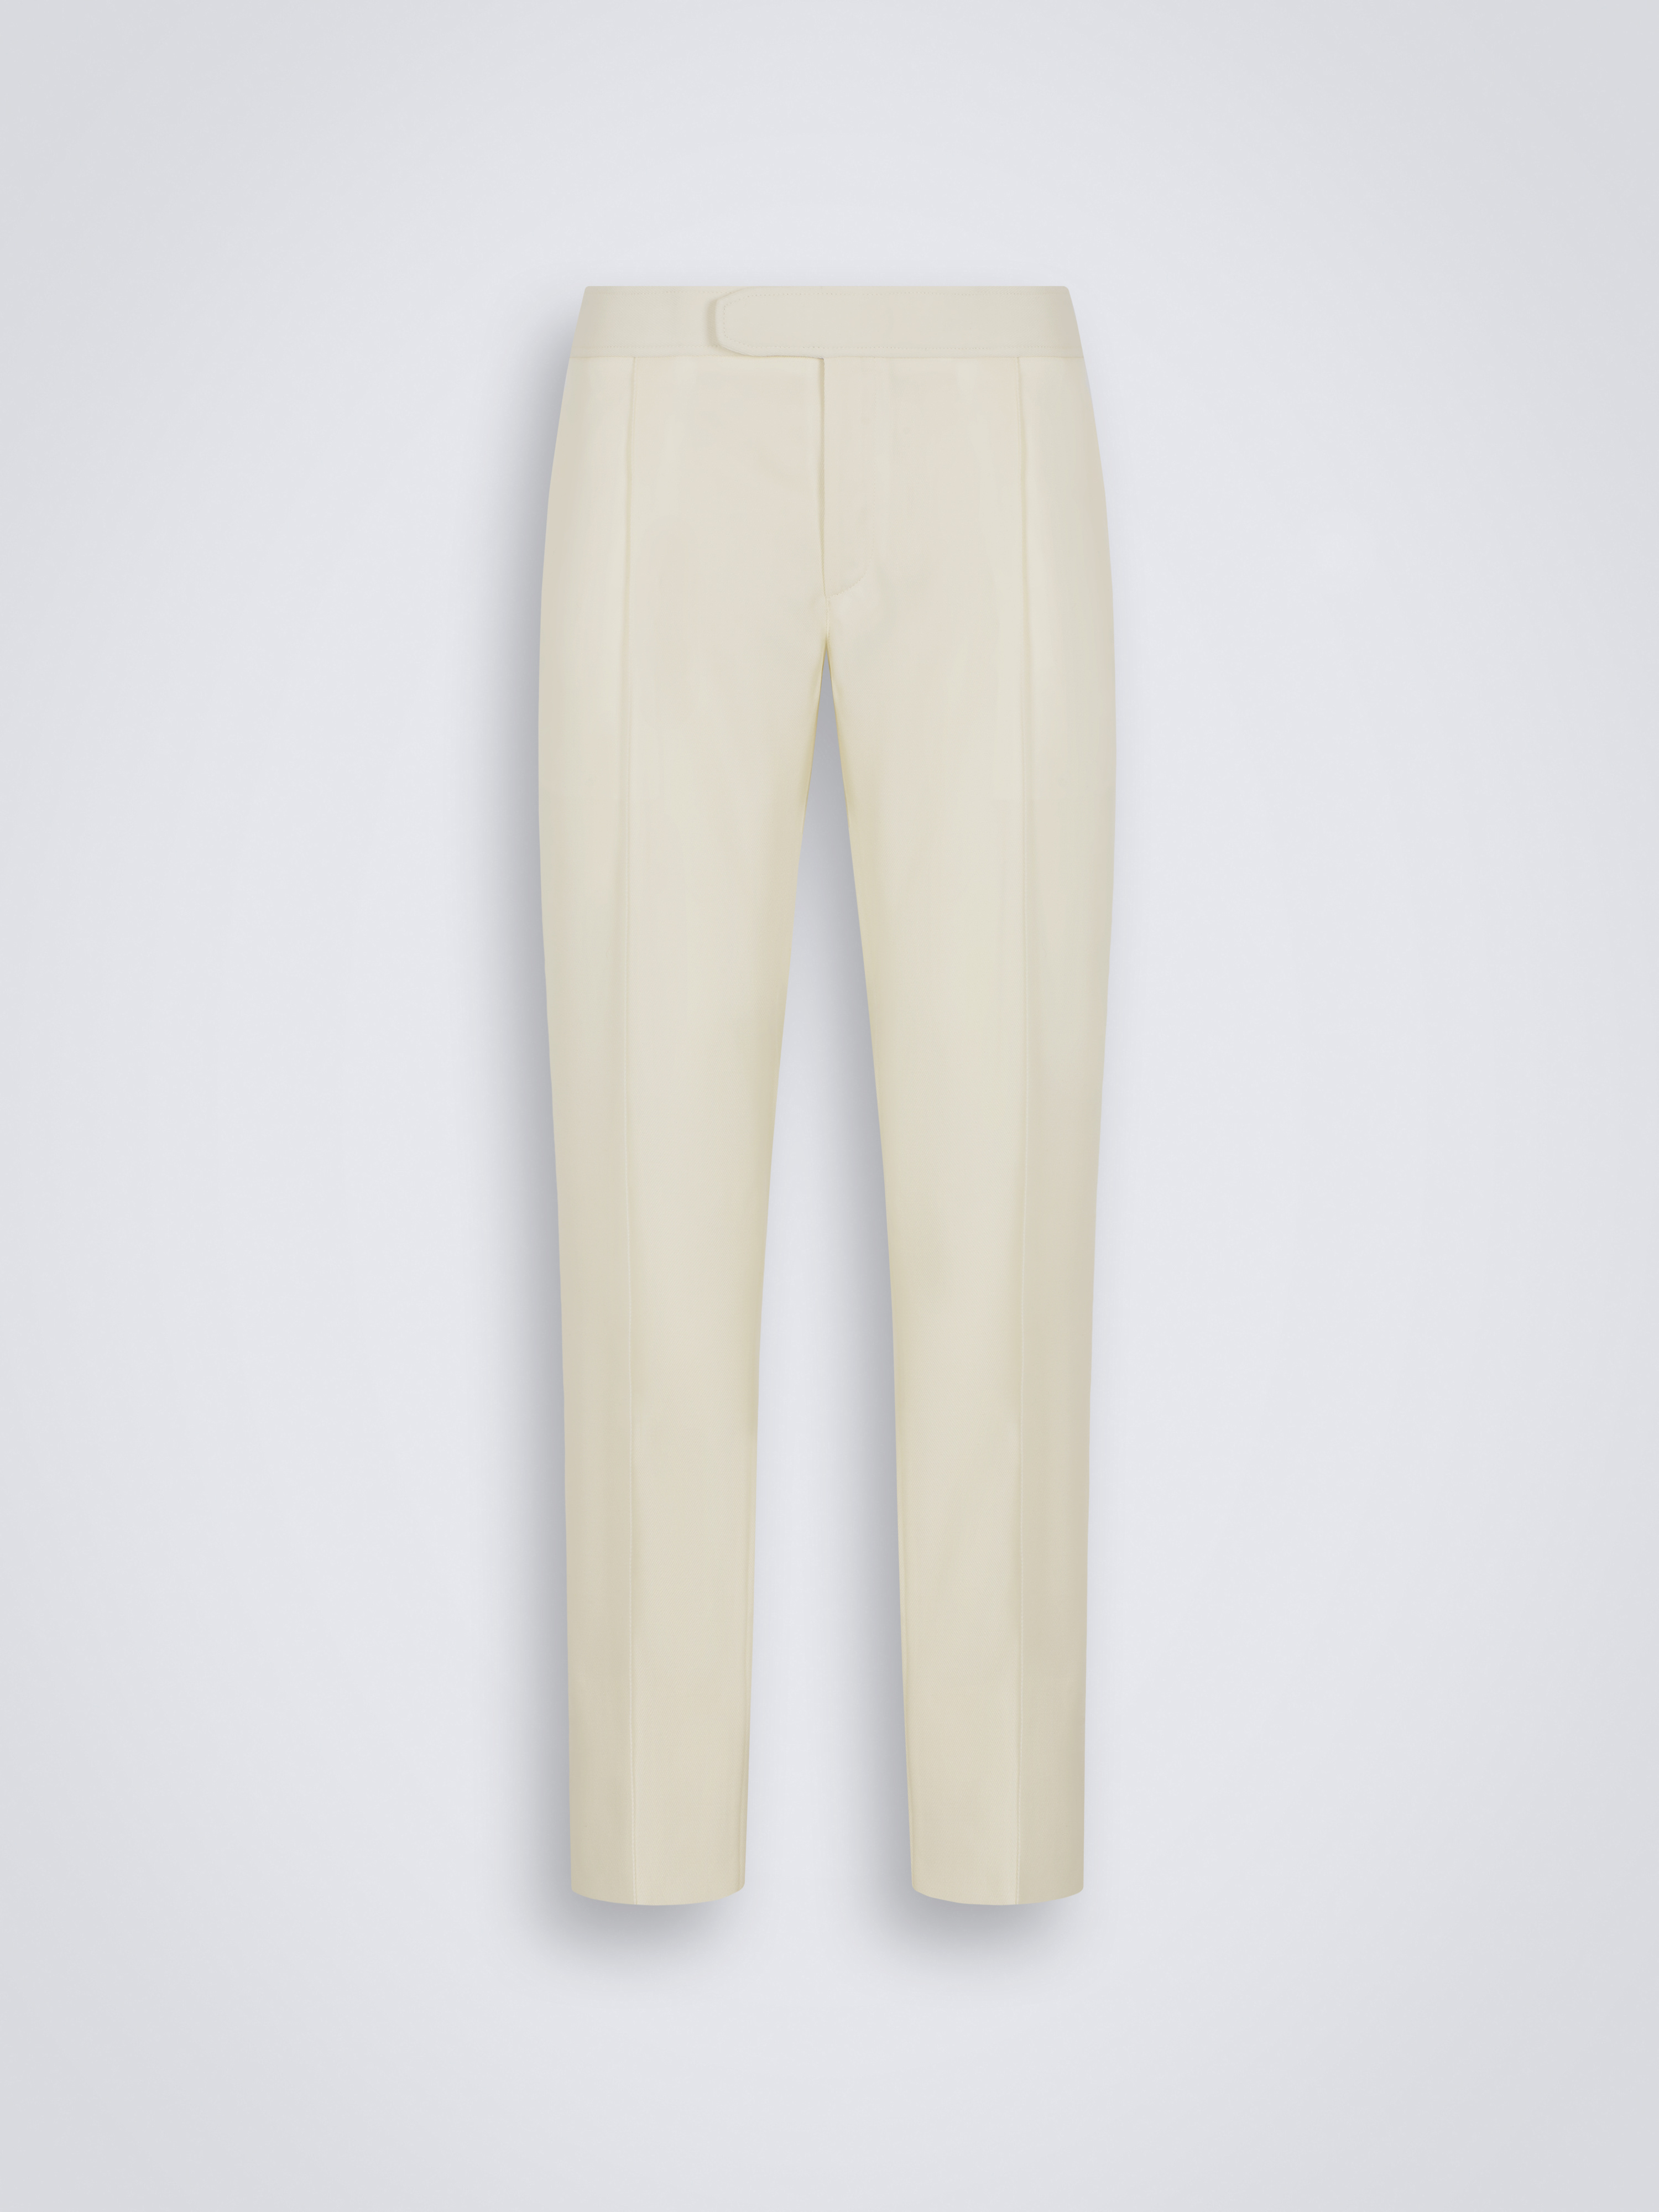 Allen Solly Casual Trousers  Buy Allen Solly Cream Trousers Online  Nykaa  Fashion